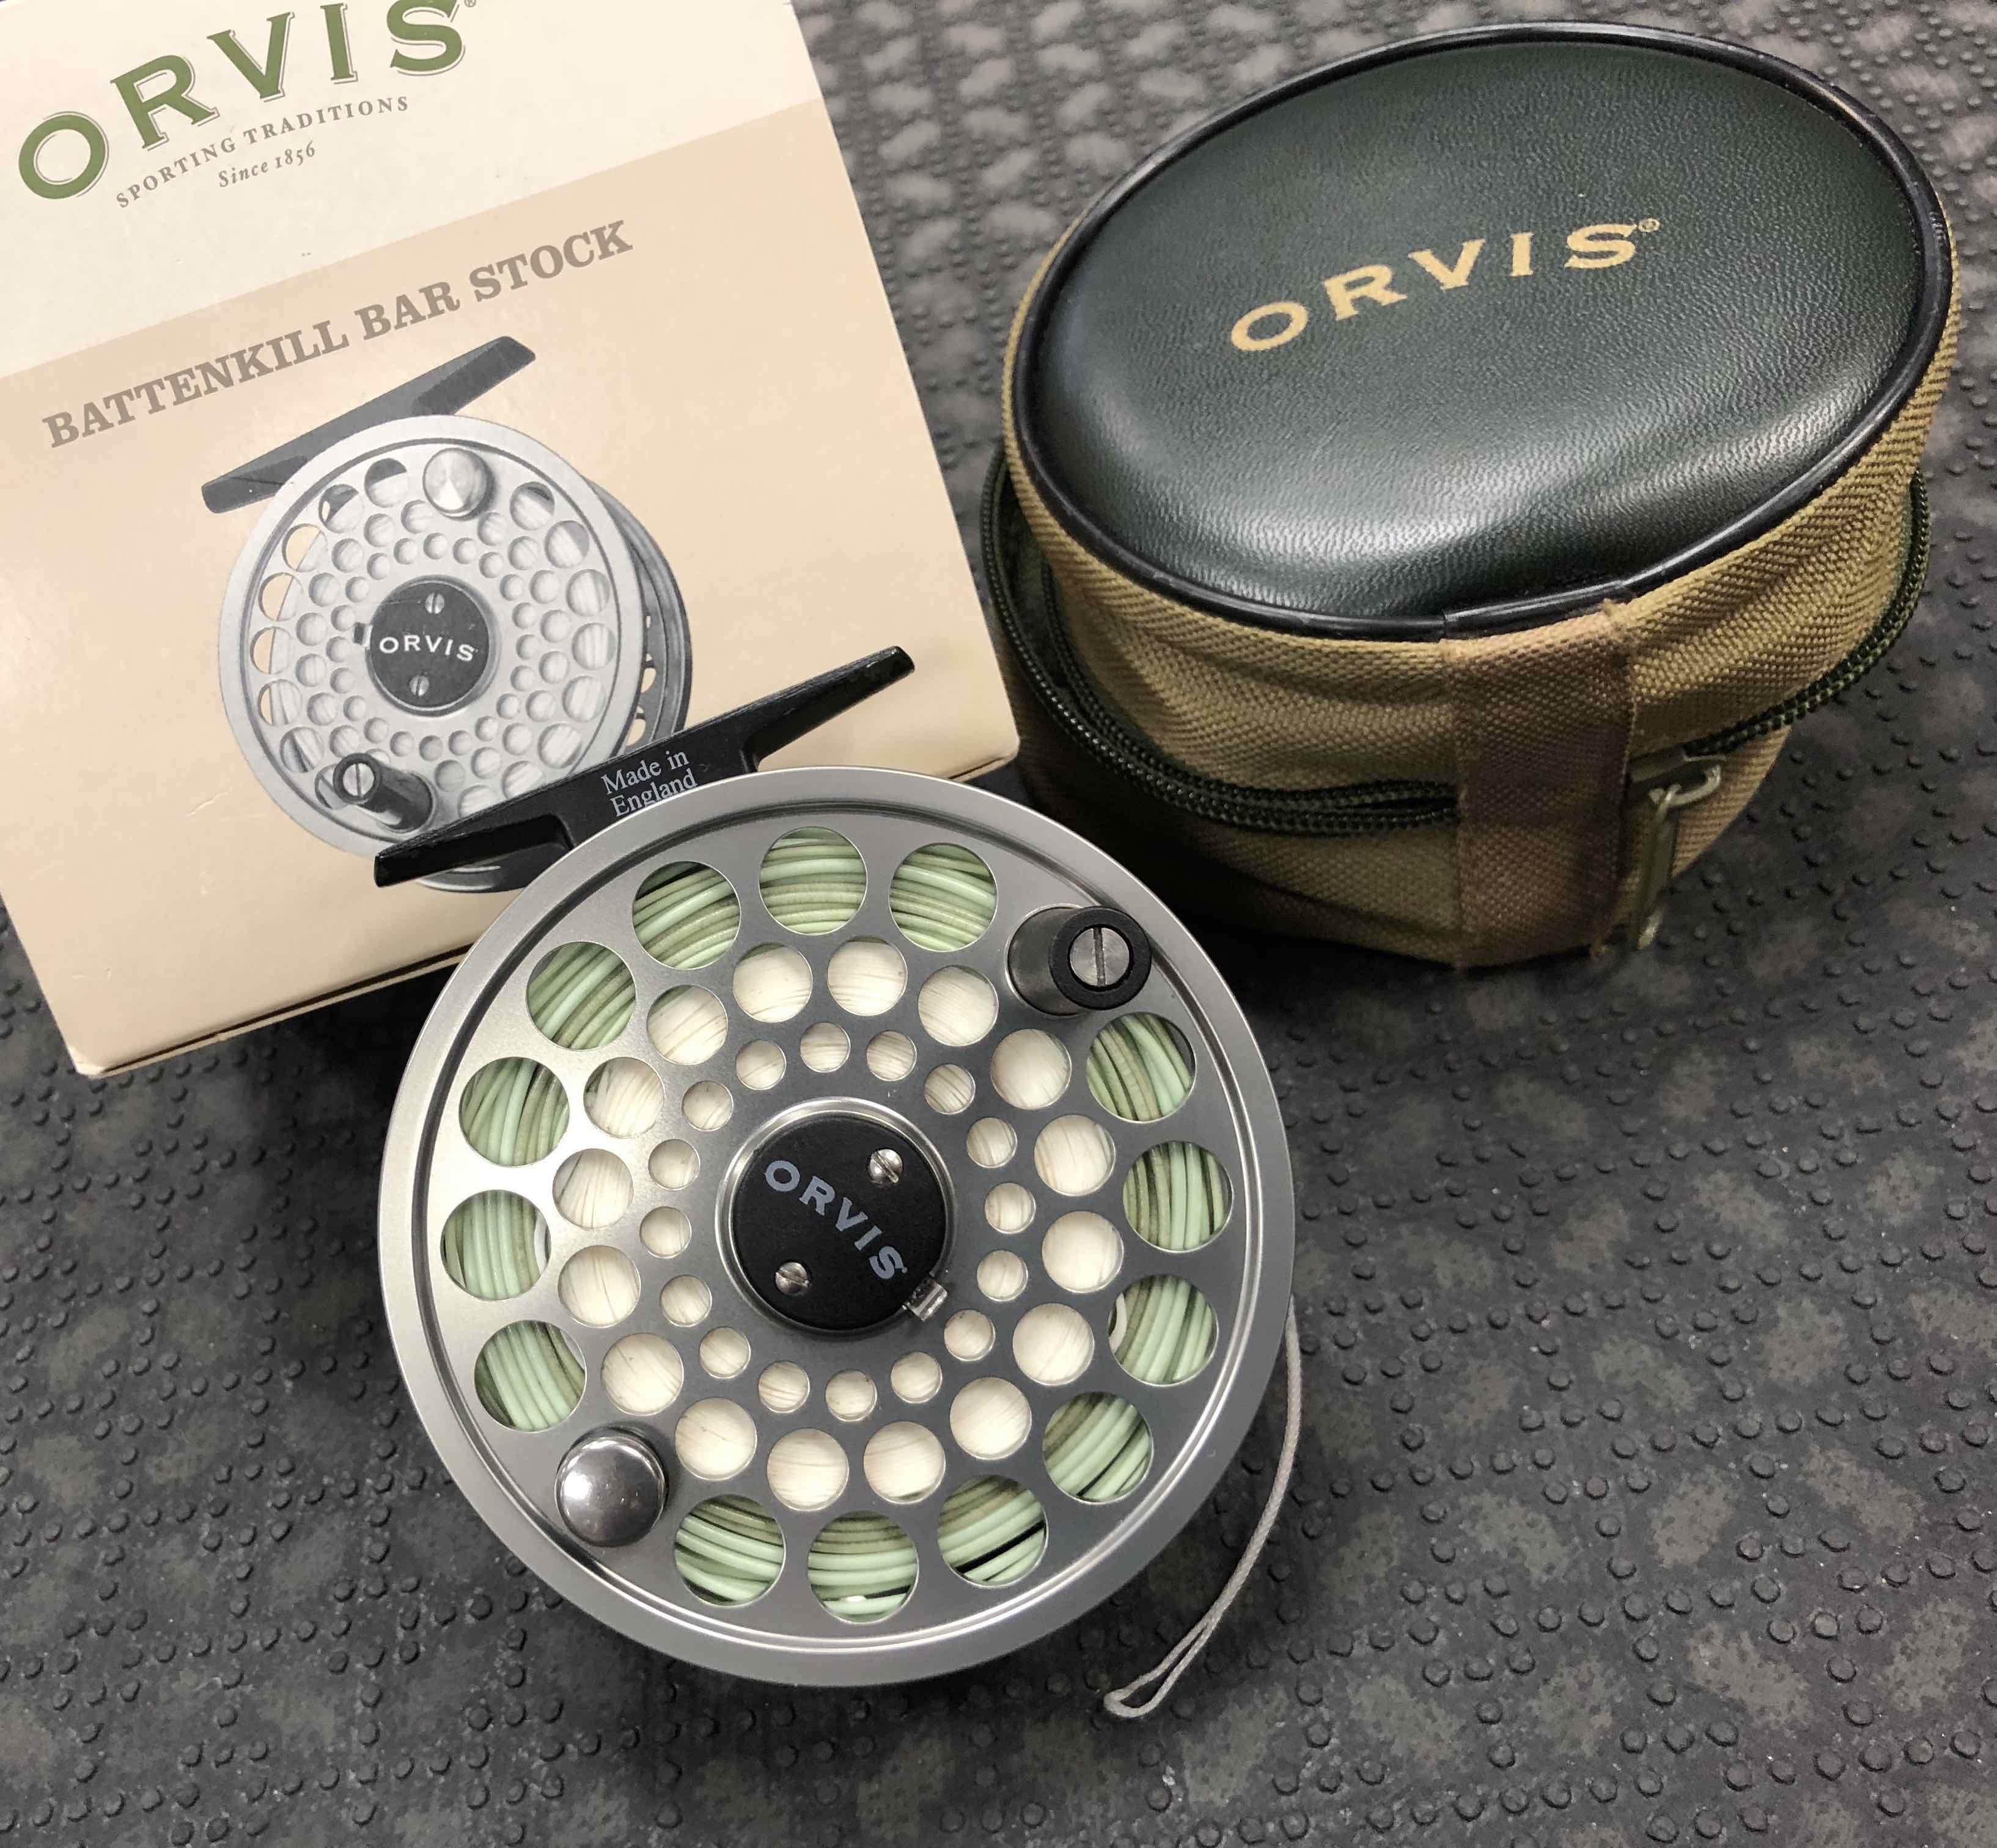 Orvis Made in England Battenkill BBS V Fly Reel - Titanium c/w WF8F & Original Box & Zippered Pouch - GREAT SHAPE! - $150